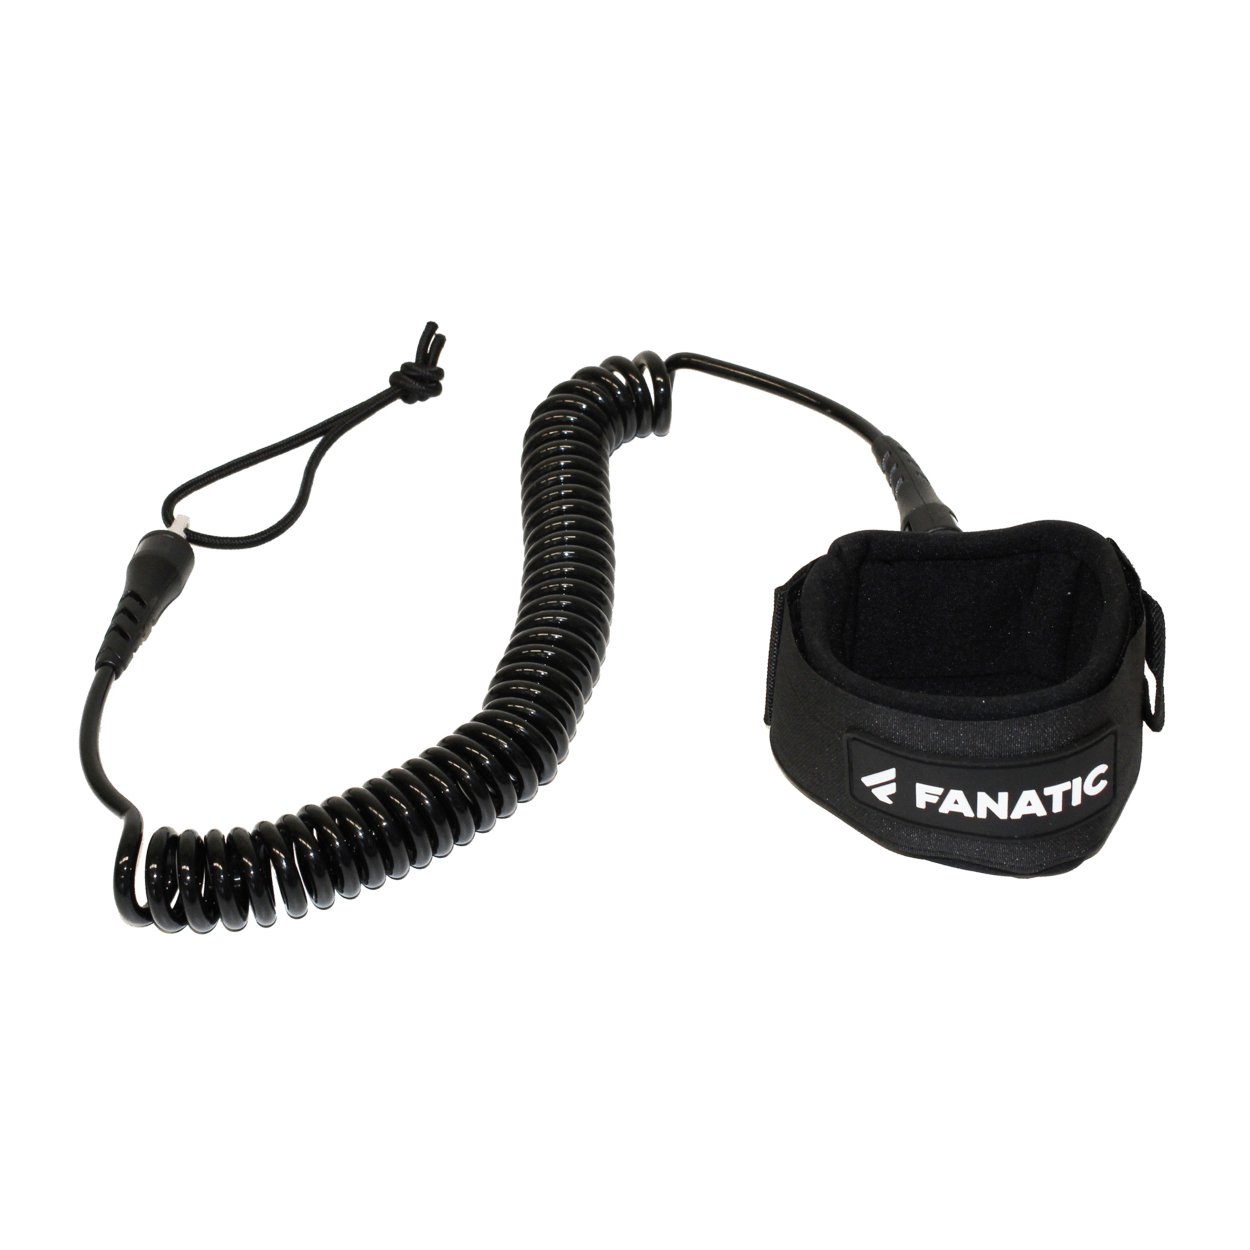 Fanatic Leash 2023 - Worthing Watersports - 9008415939206 - Accessories - Fanatic SUP